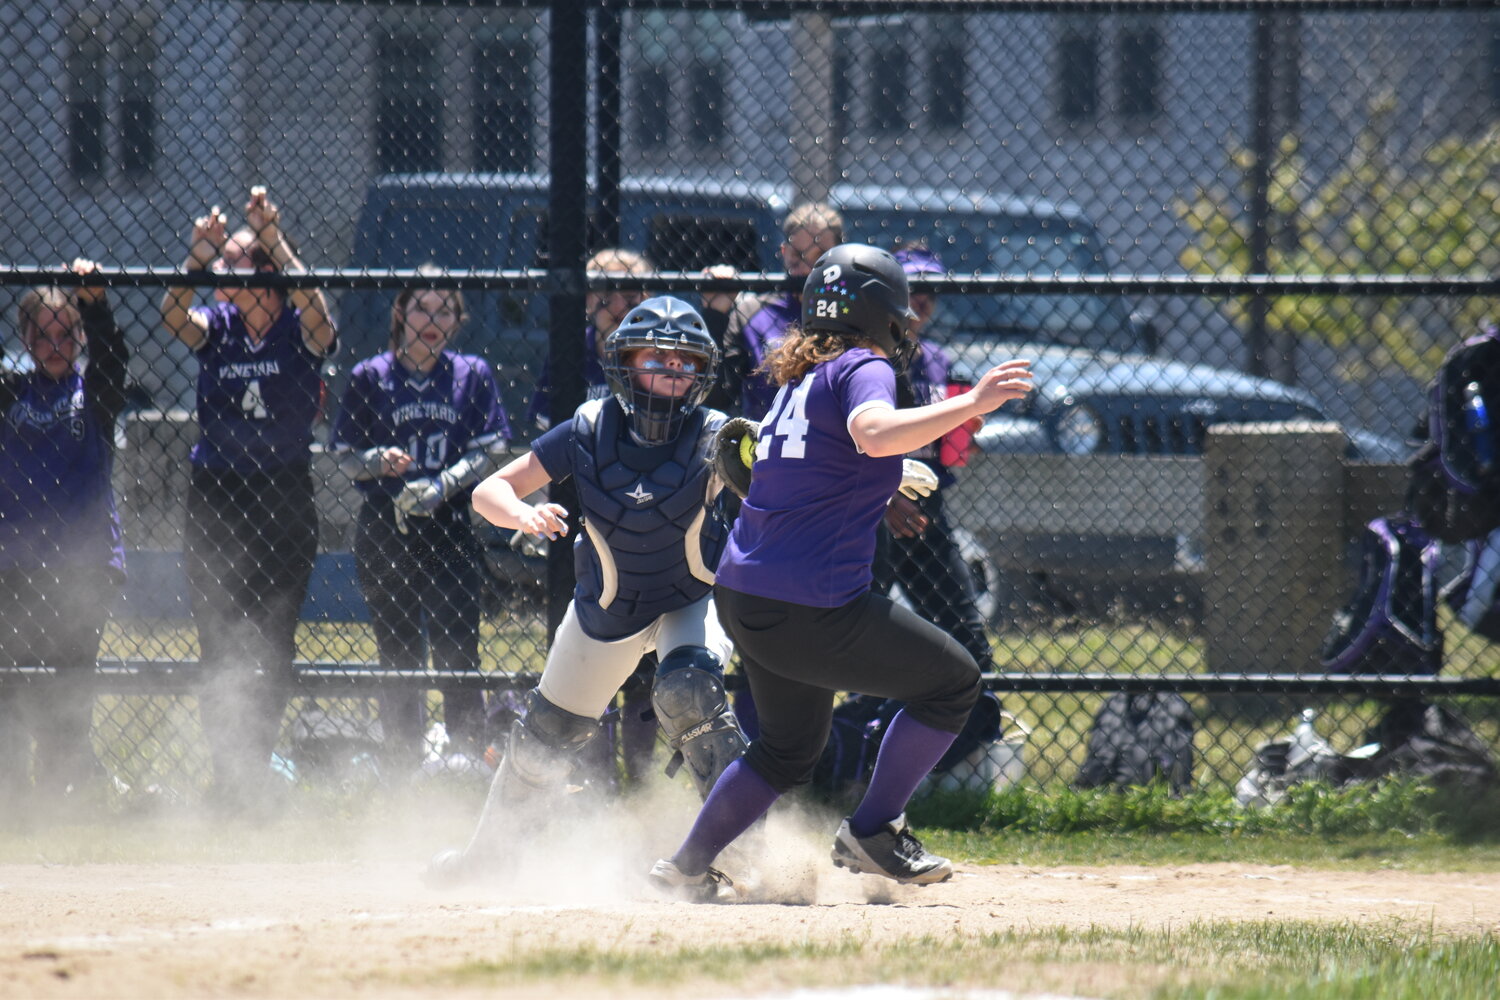 Aliza Scott tags out a Martha's Vineyard base runner at hone plate during Saturday's 29-8 win for the Whalers.